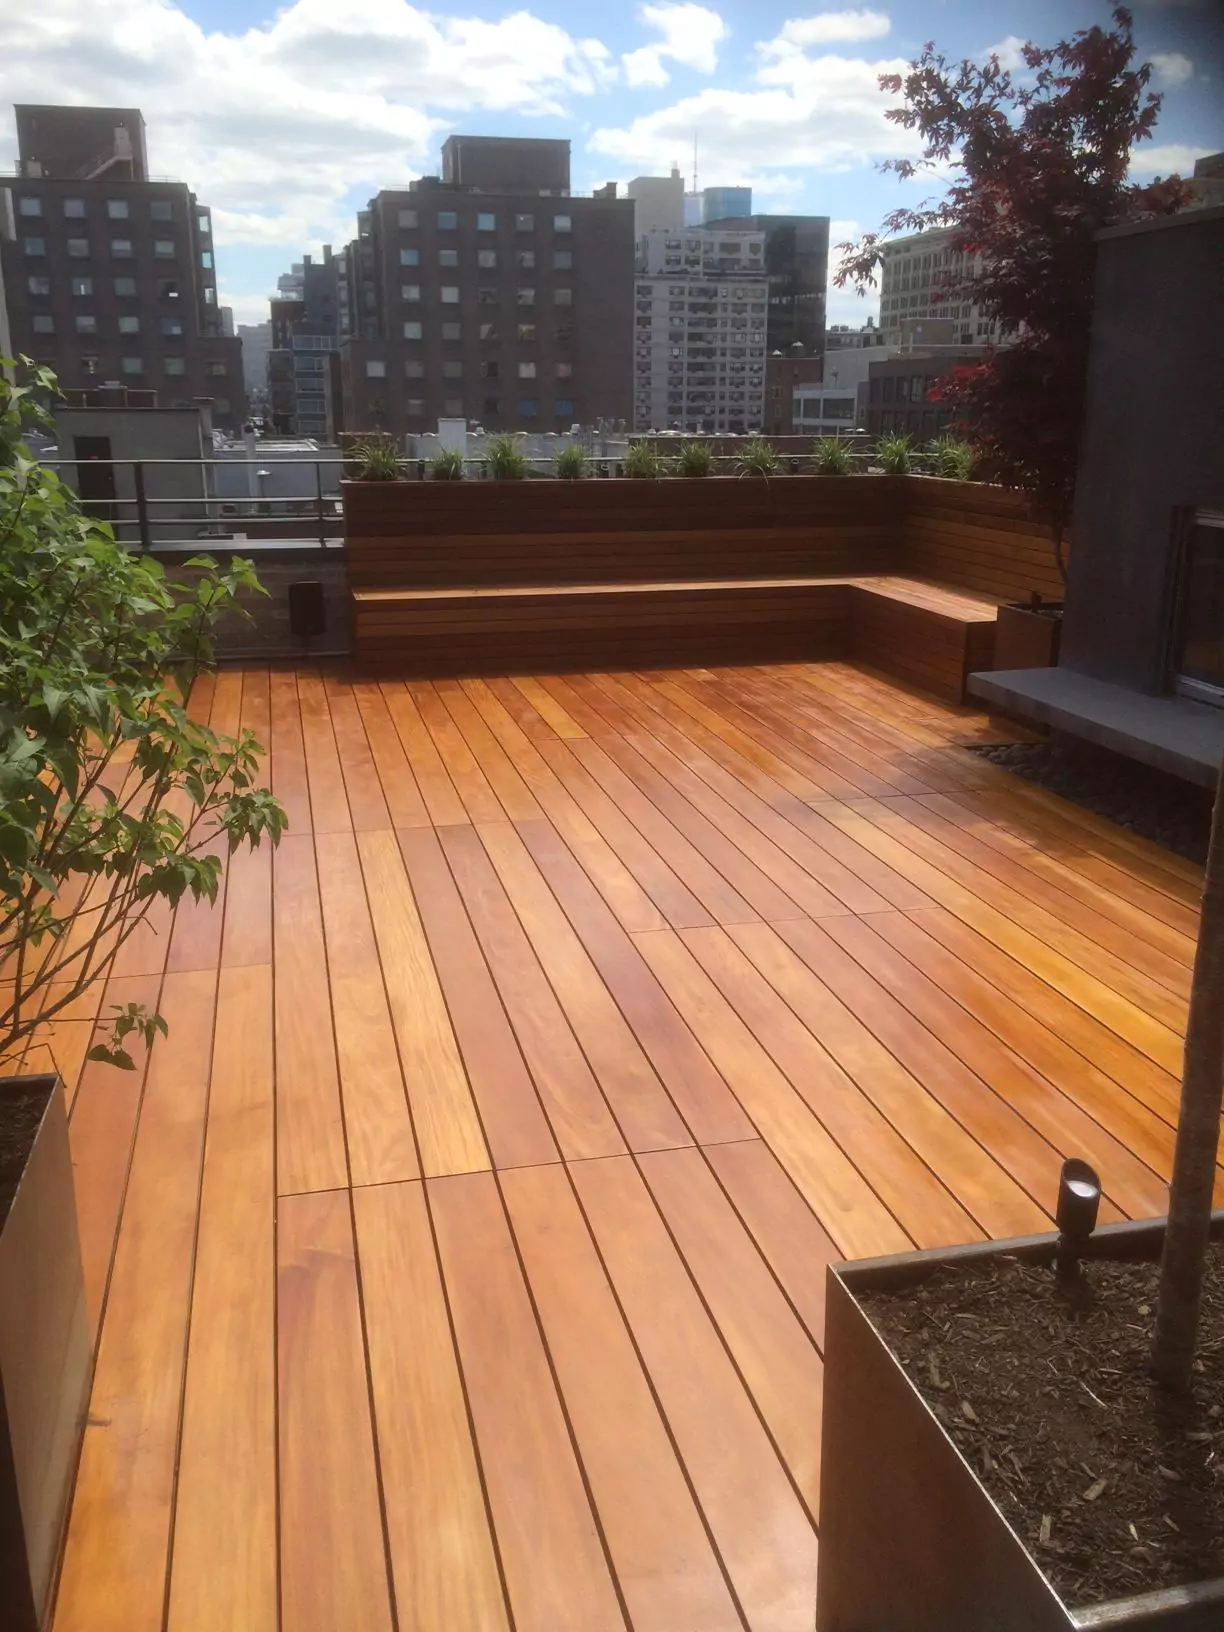 Deck Installation Tips: Eurotec Deck System vs. Sleepers